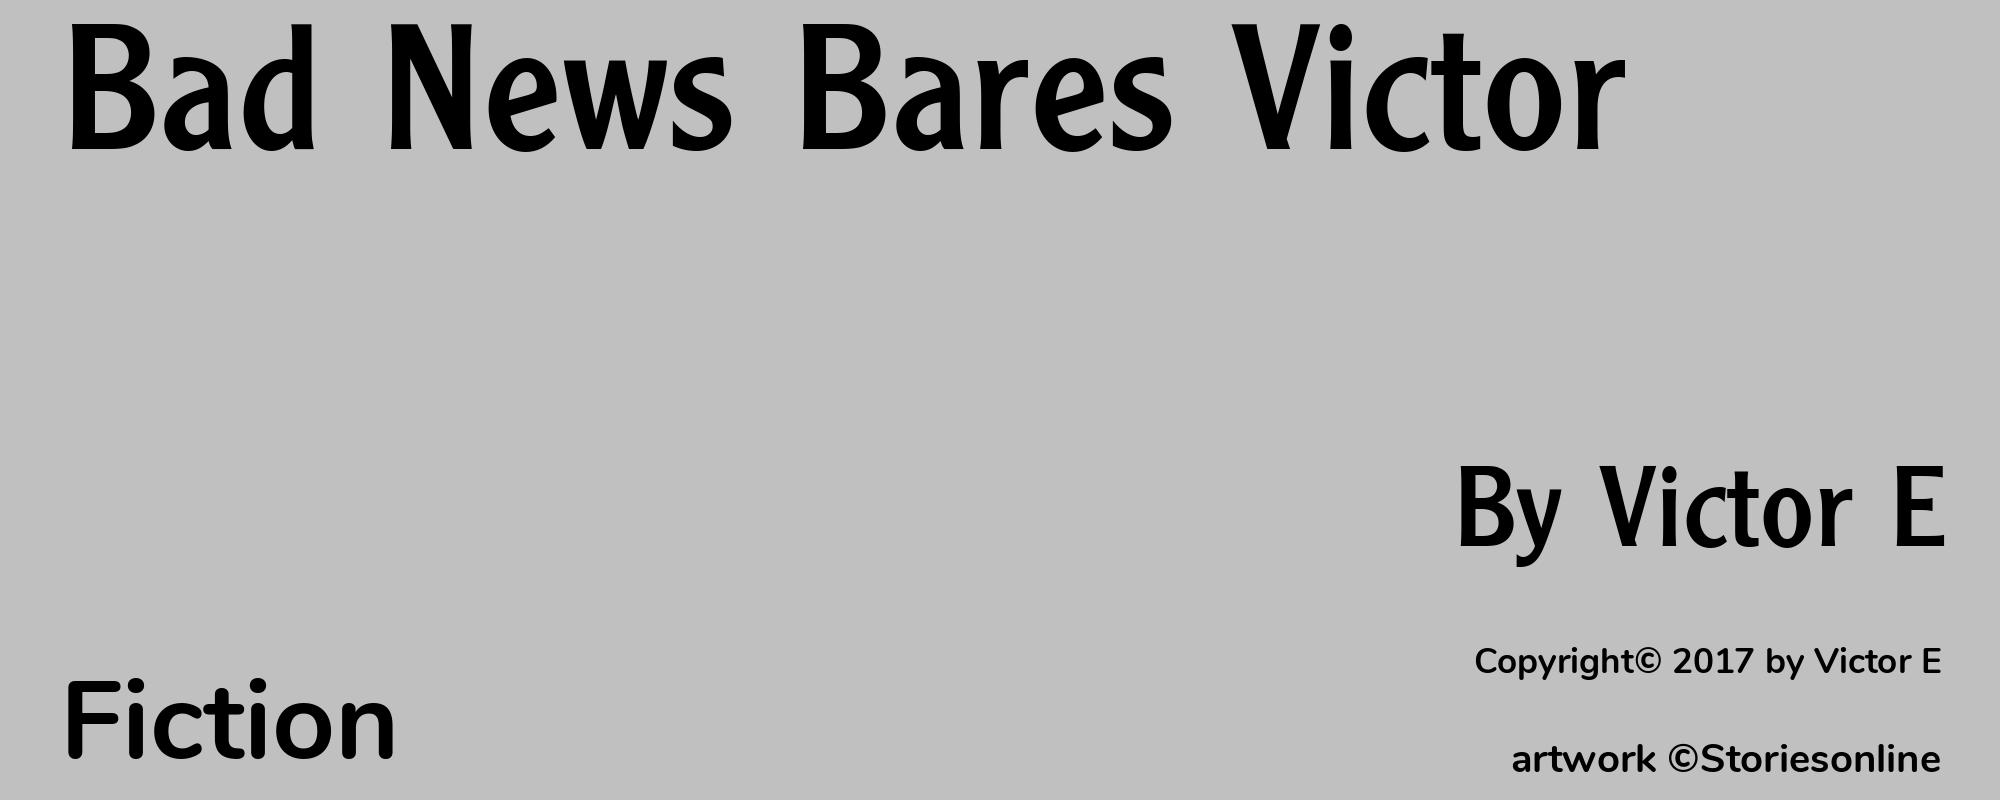 Bad News Bares Victor - Cover